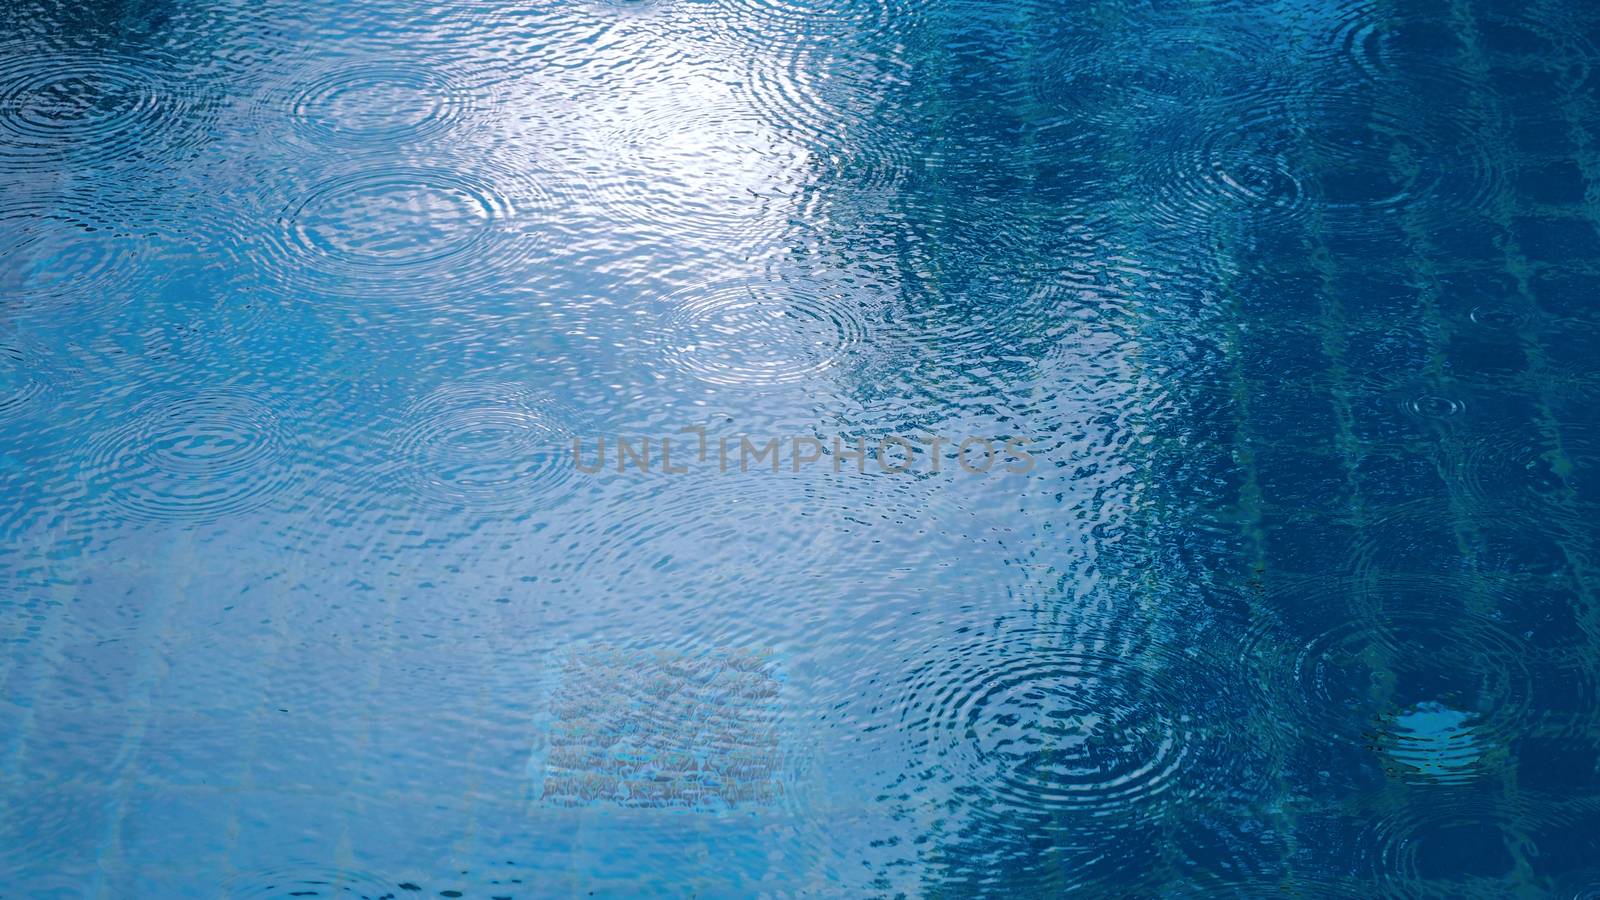 Rain drop on the surface of swiming pool. by gnepphoto